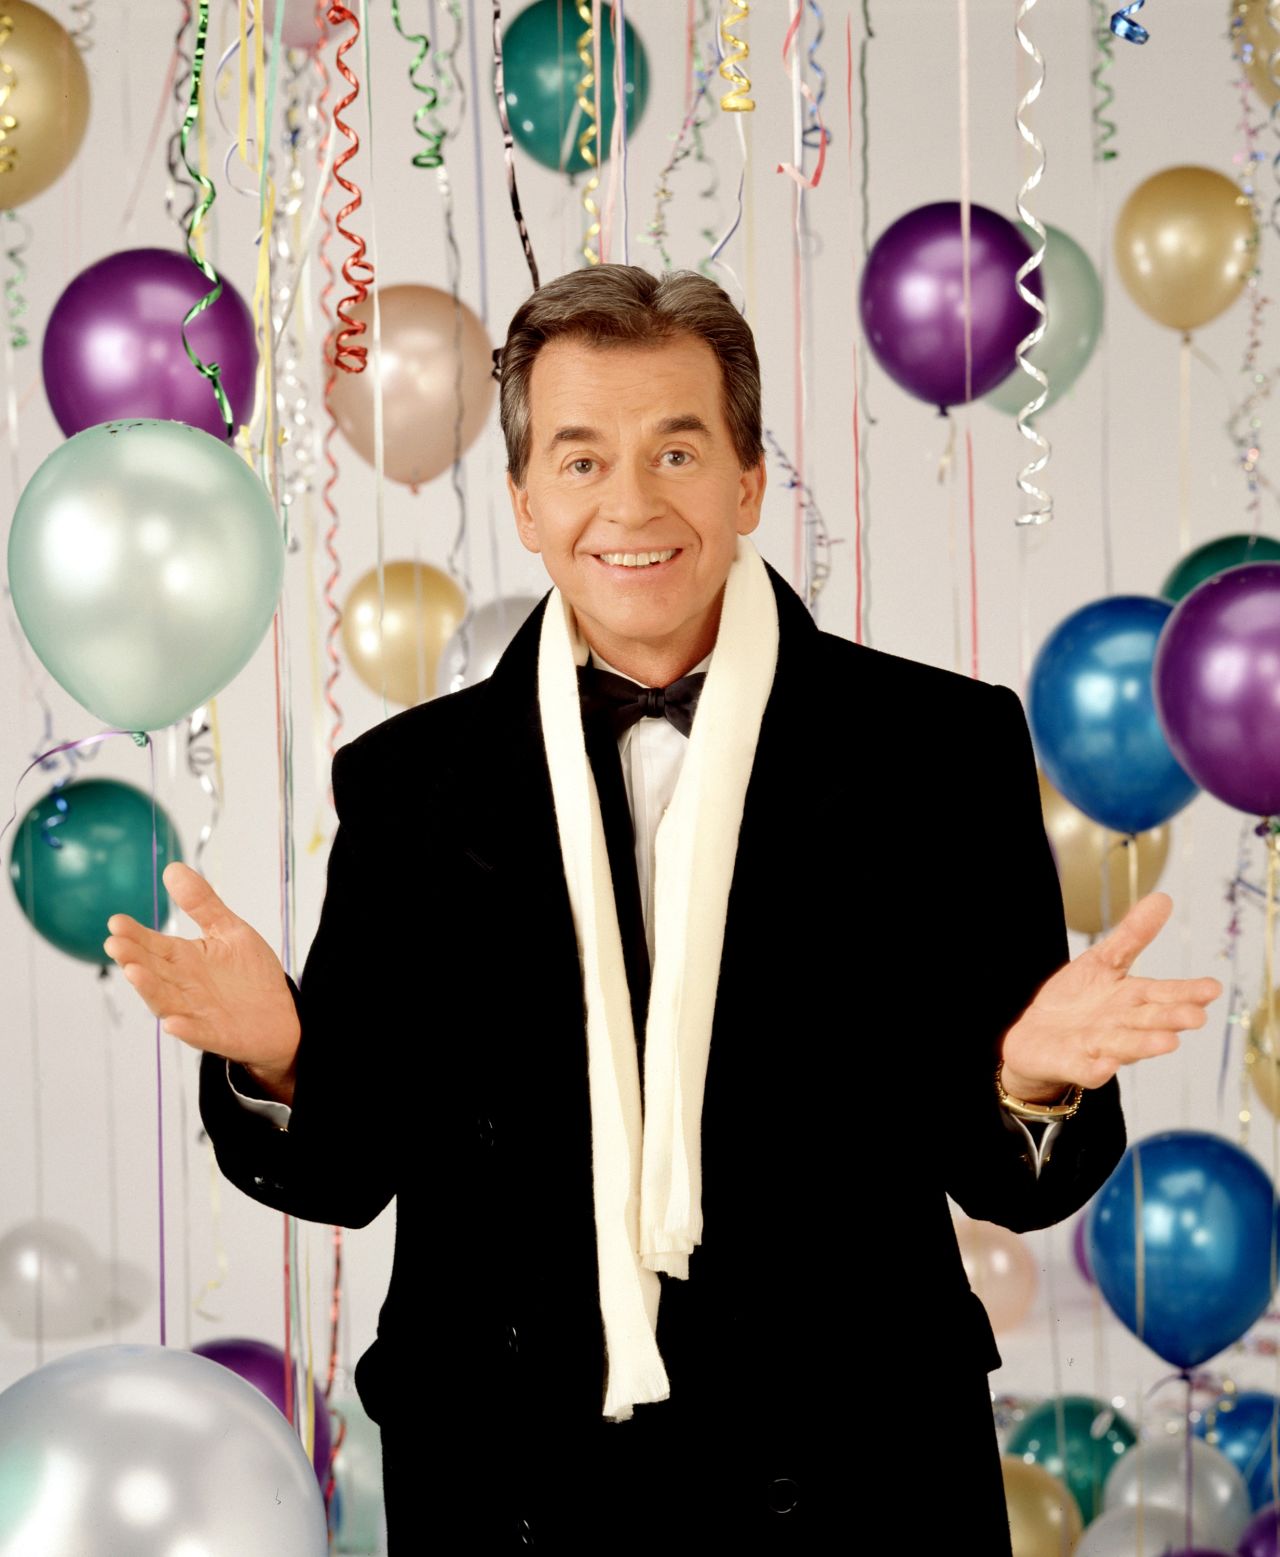 Clark hosts his annual ABC New Year special from New York's Times Square in 1994.